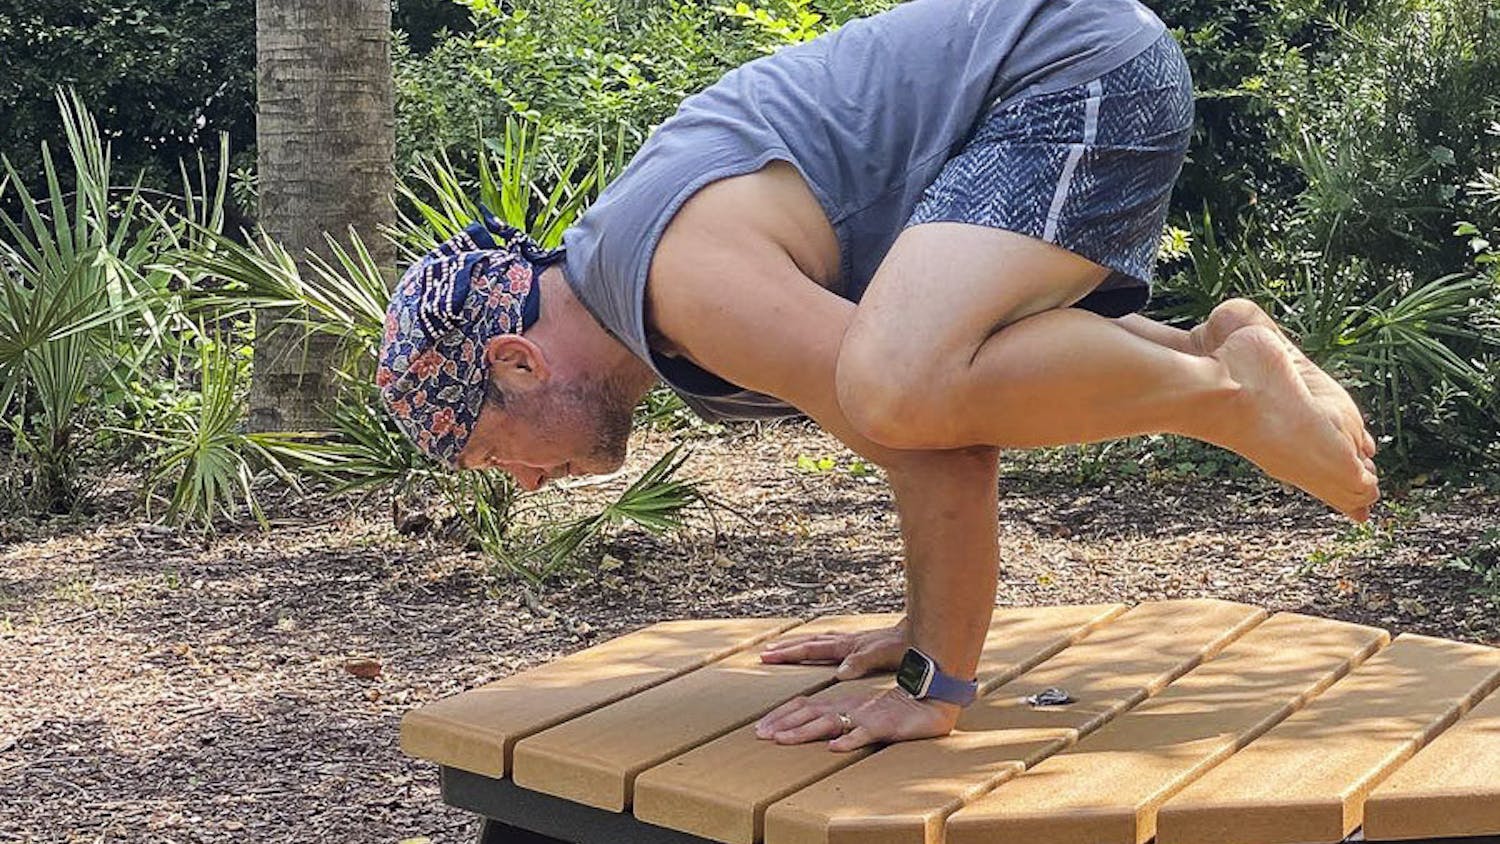 David Moscowitz, a professor at the School of Journalism and Mass Communications stands in the Bakasana yoga pose, a.k.a. the Crow Pose. Moscowitz offers donation-funded yoga lessons at Rooted Yoga, on Sunday afternoons.&nbsp;